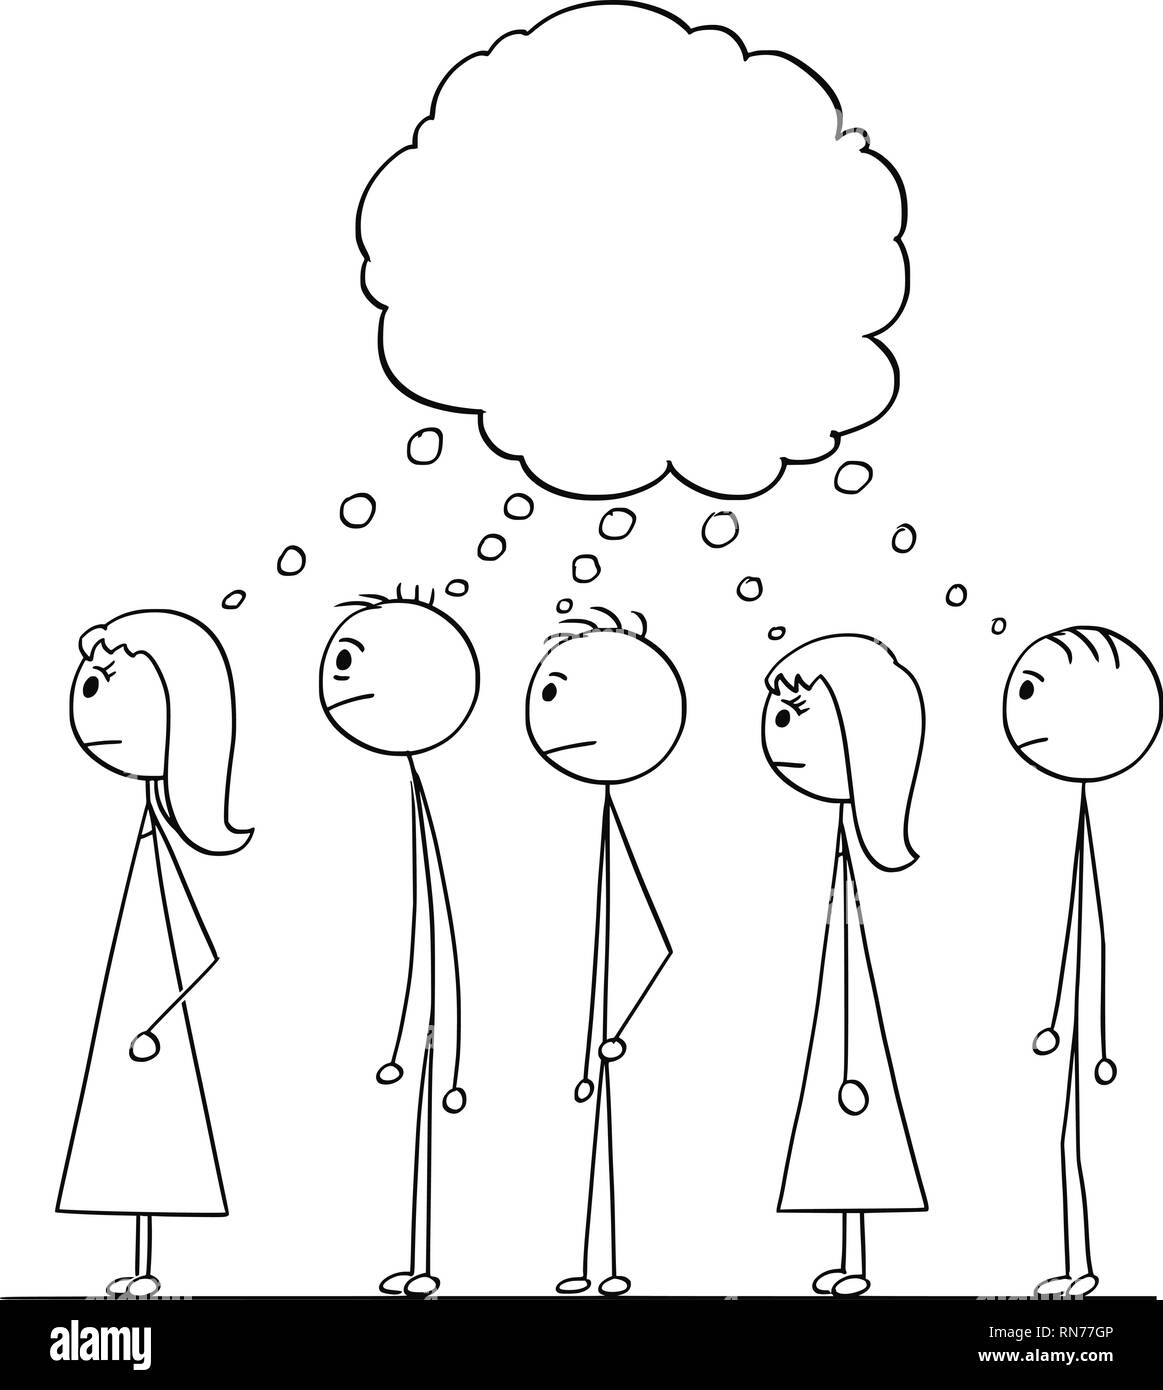 Cartoon of Group of People Waiting in Line or Queue With Empty Speech Bubble Above Stock Vector